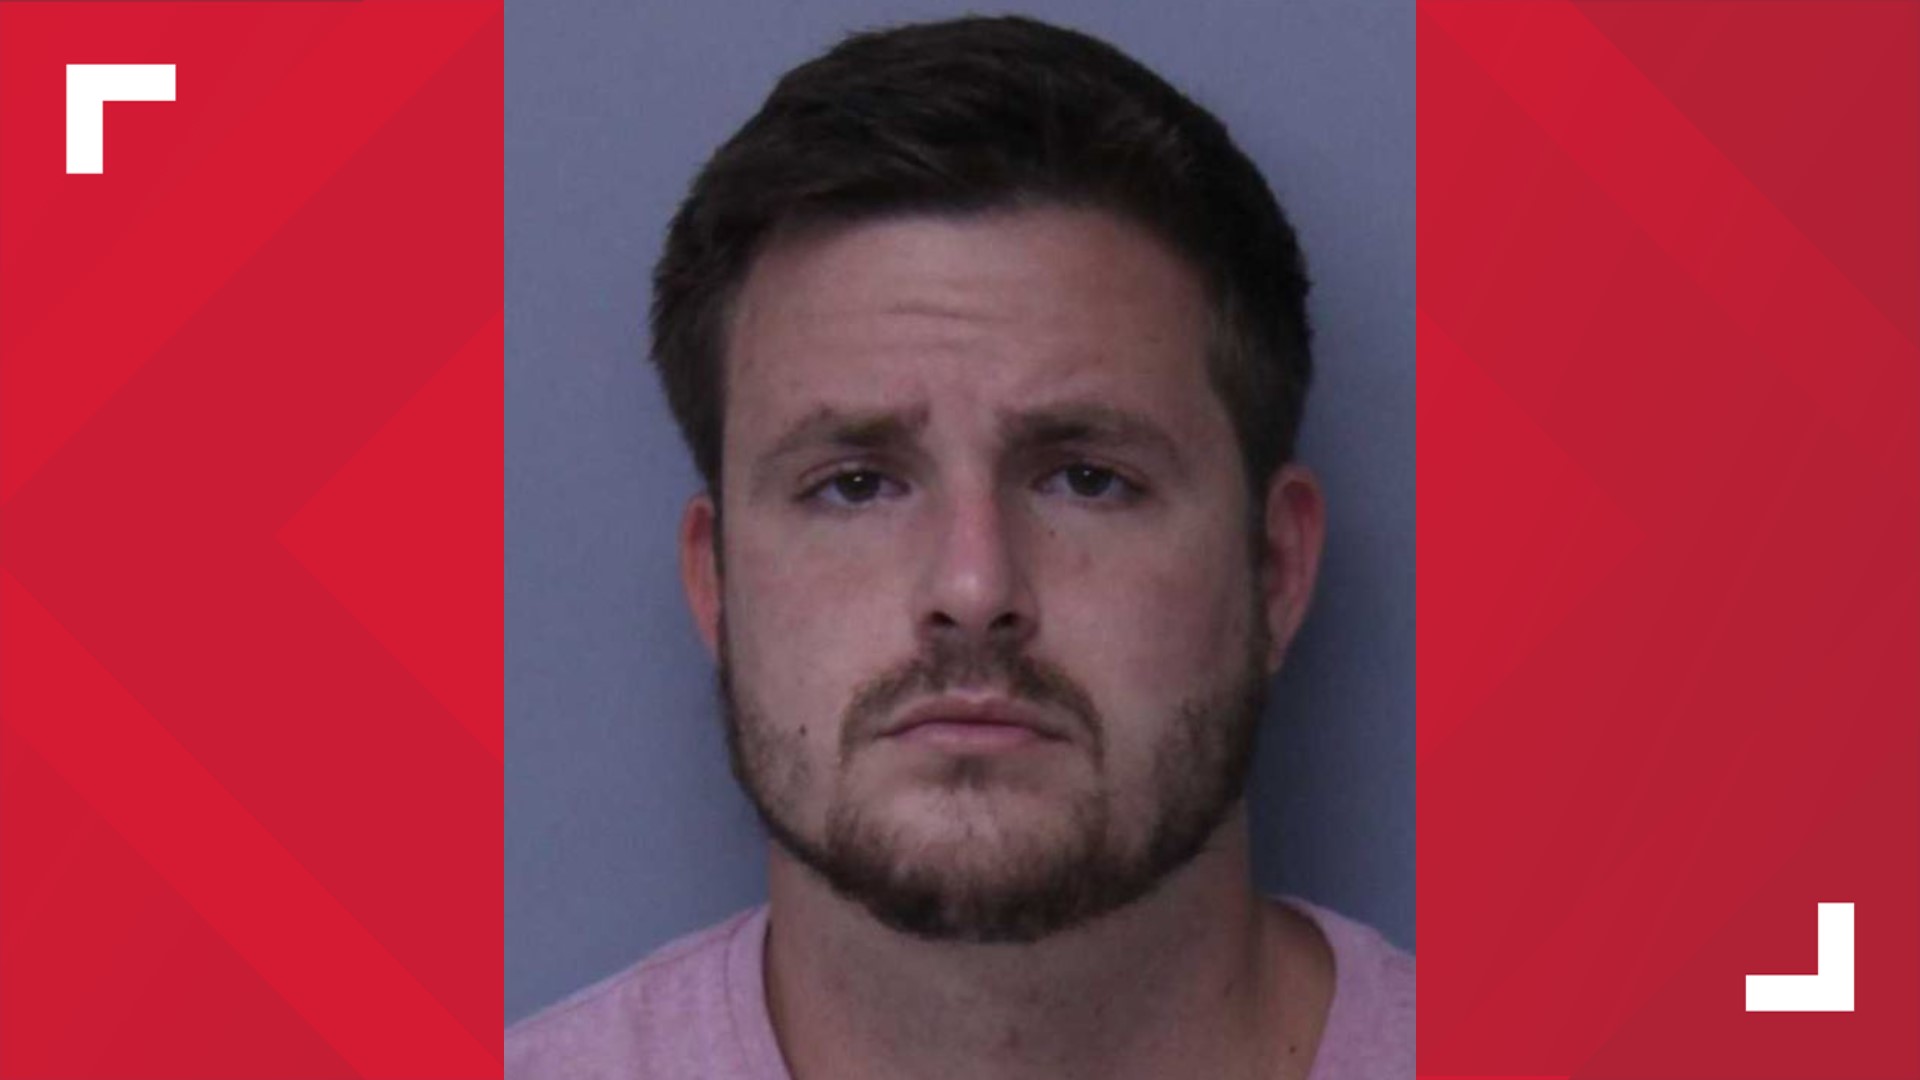 A man charged with the drug-induced murder of a 27-year-old St. Johns County resident will face a new judge Thursday after the first judge was removed from the case.